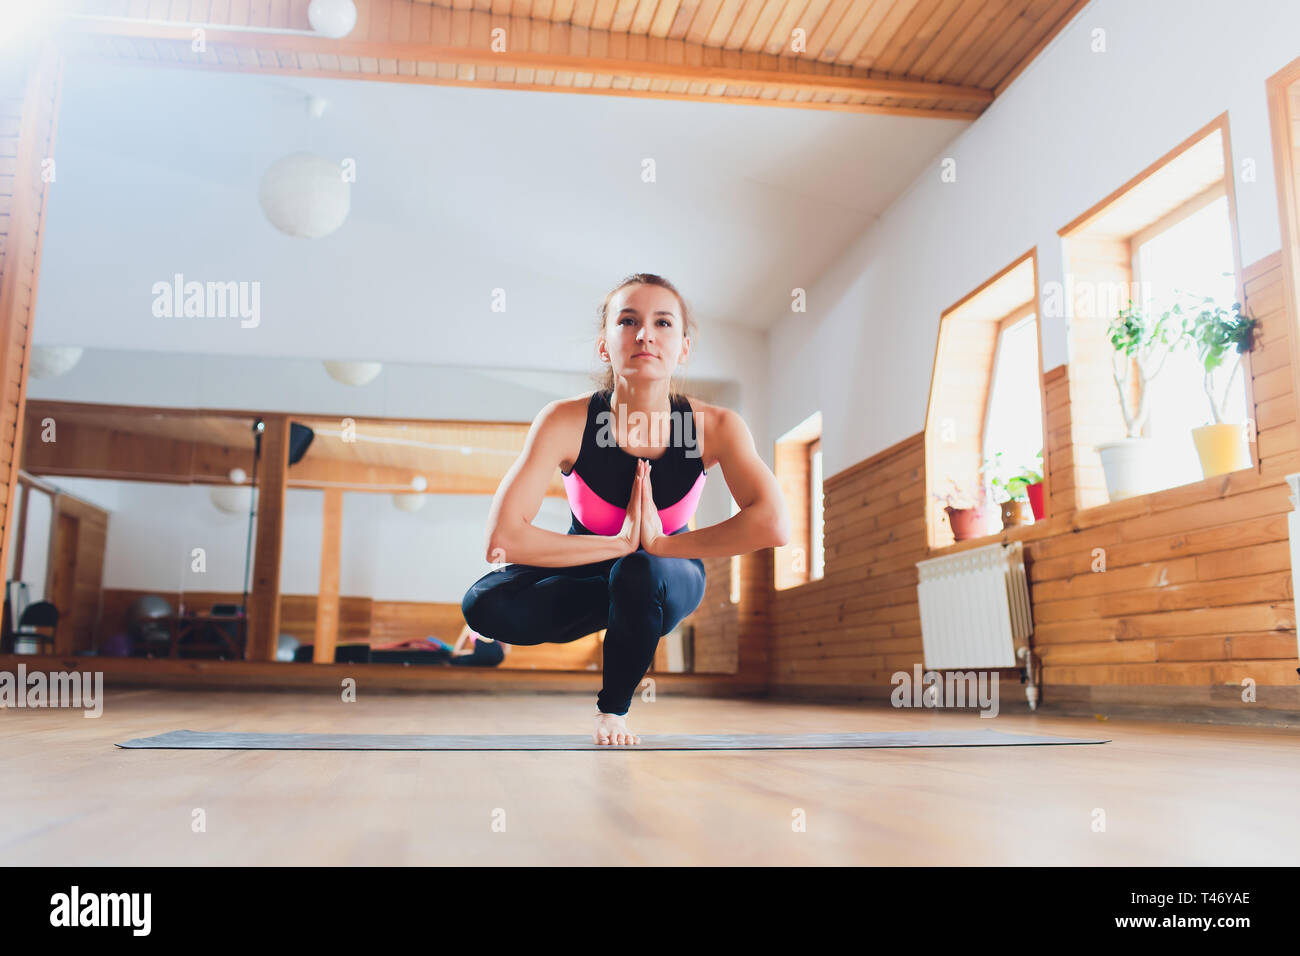 young woman doing one legged squat yoga pose outdoors Stock Photo - Alamy